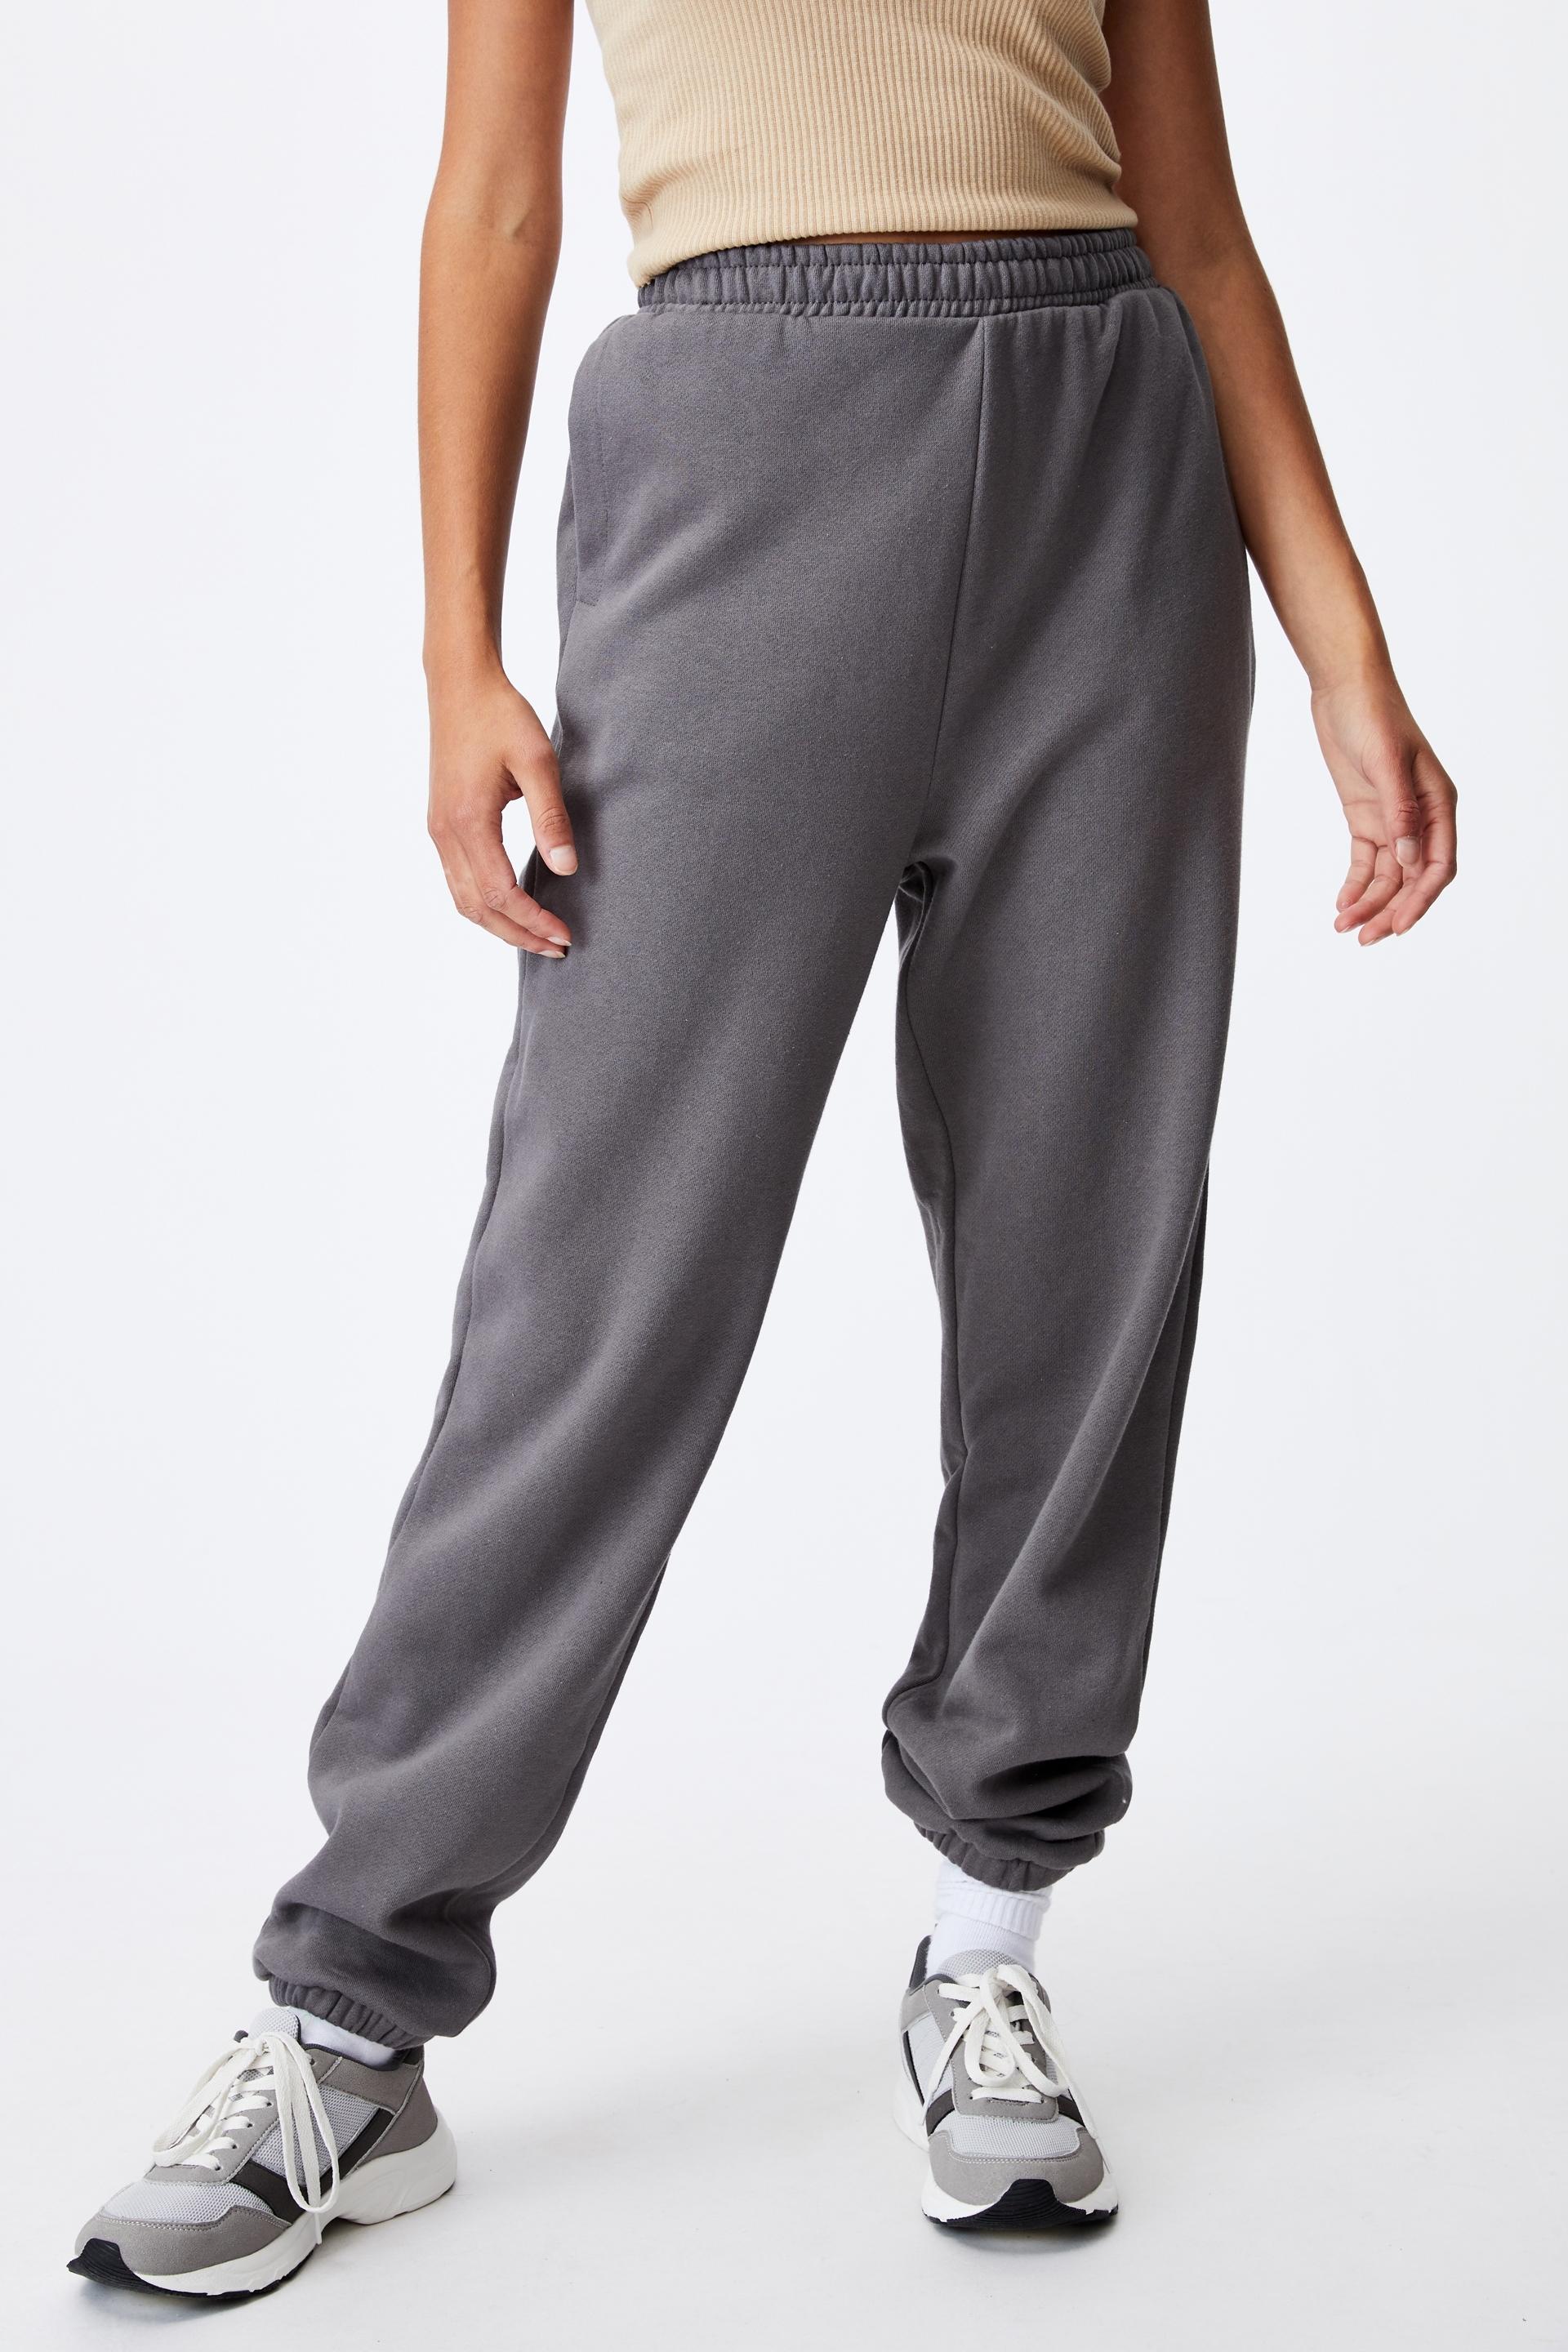 Classic track pants - ash grey Cotton On Trousers | Superbalist.com